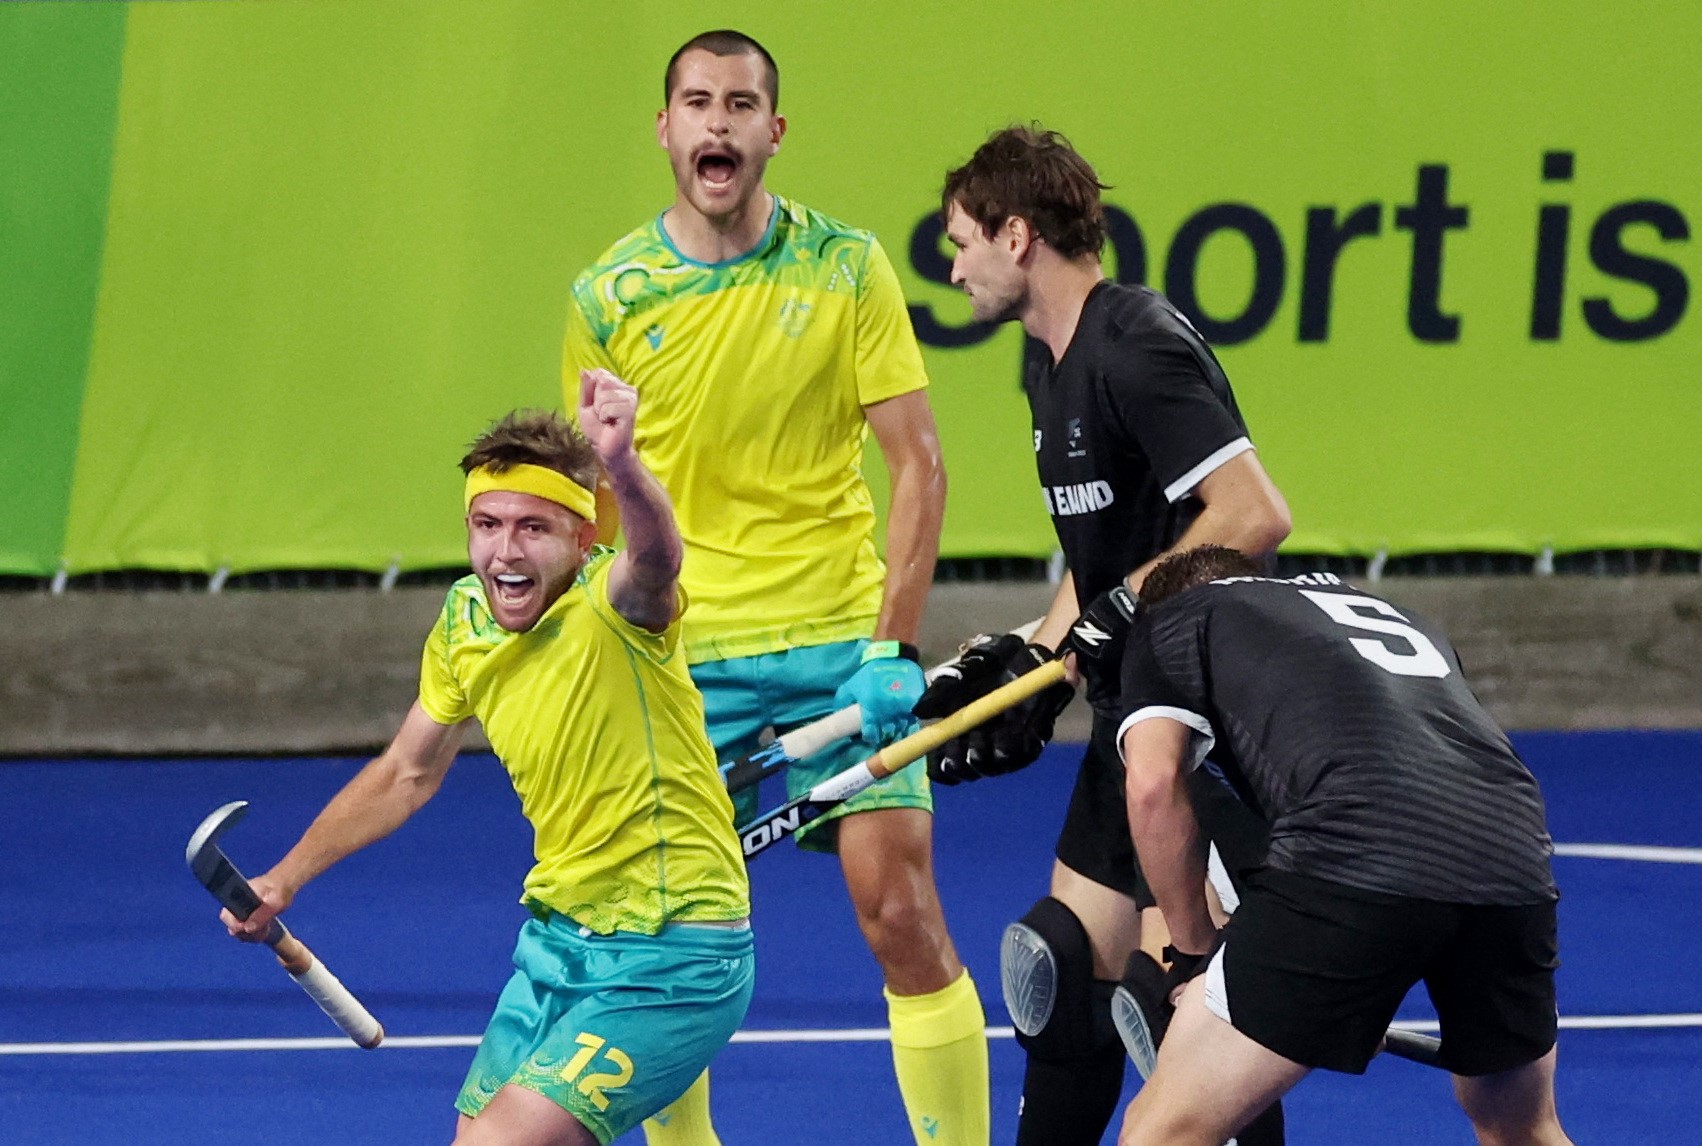 australian hockey players celebrate while new zealand players look defeated during a match